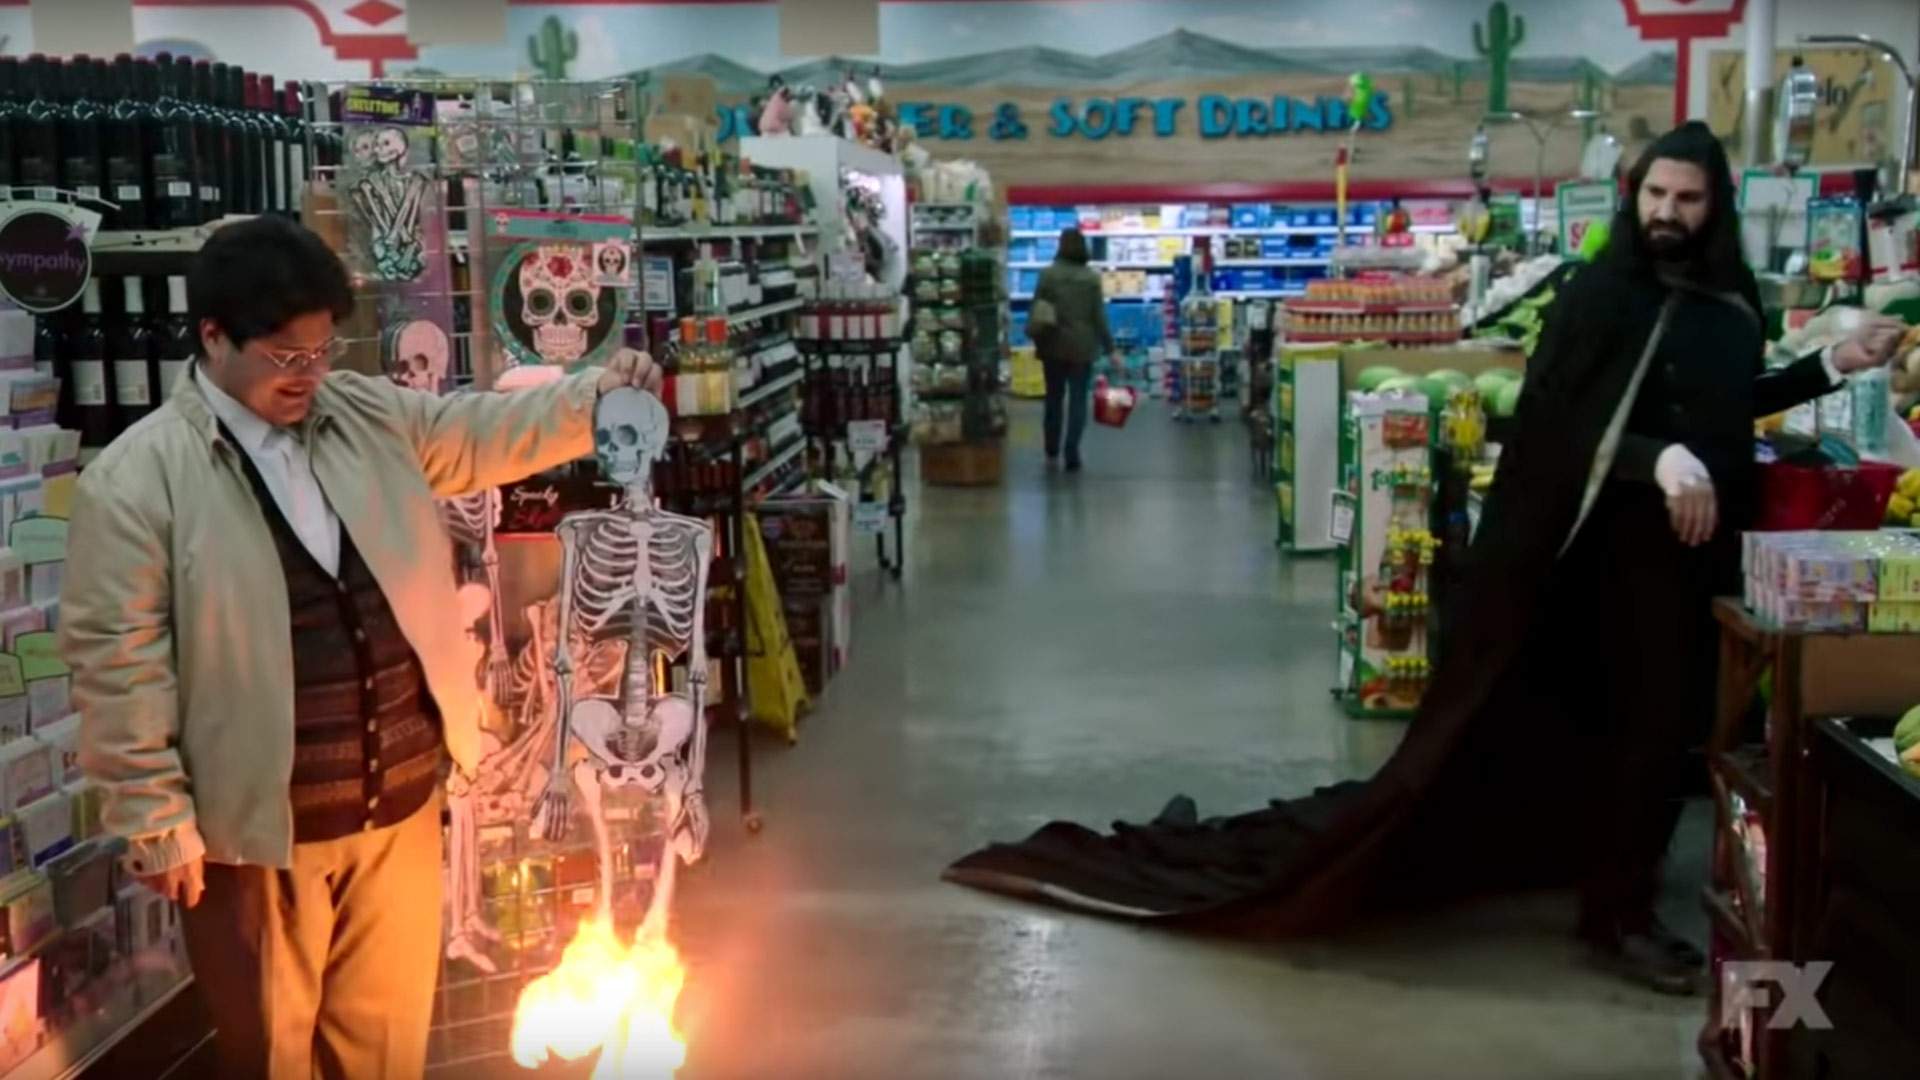 The First Full Trailer for the US Remake of 'What We Do in the Shadows' Has Finally Dropped